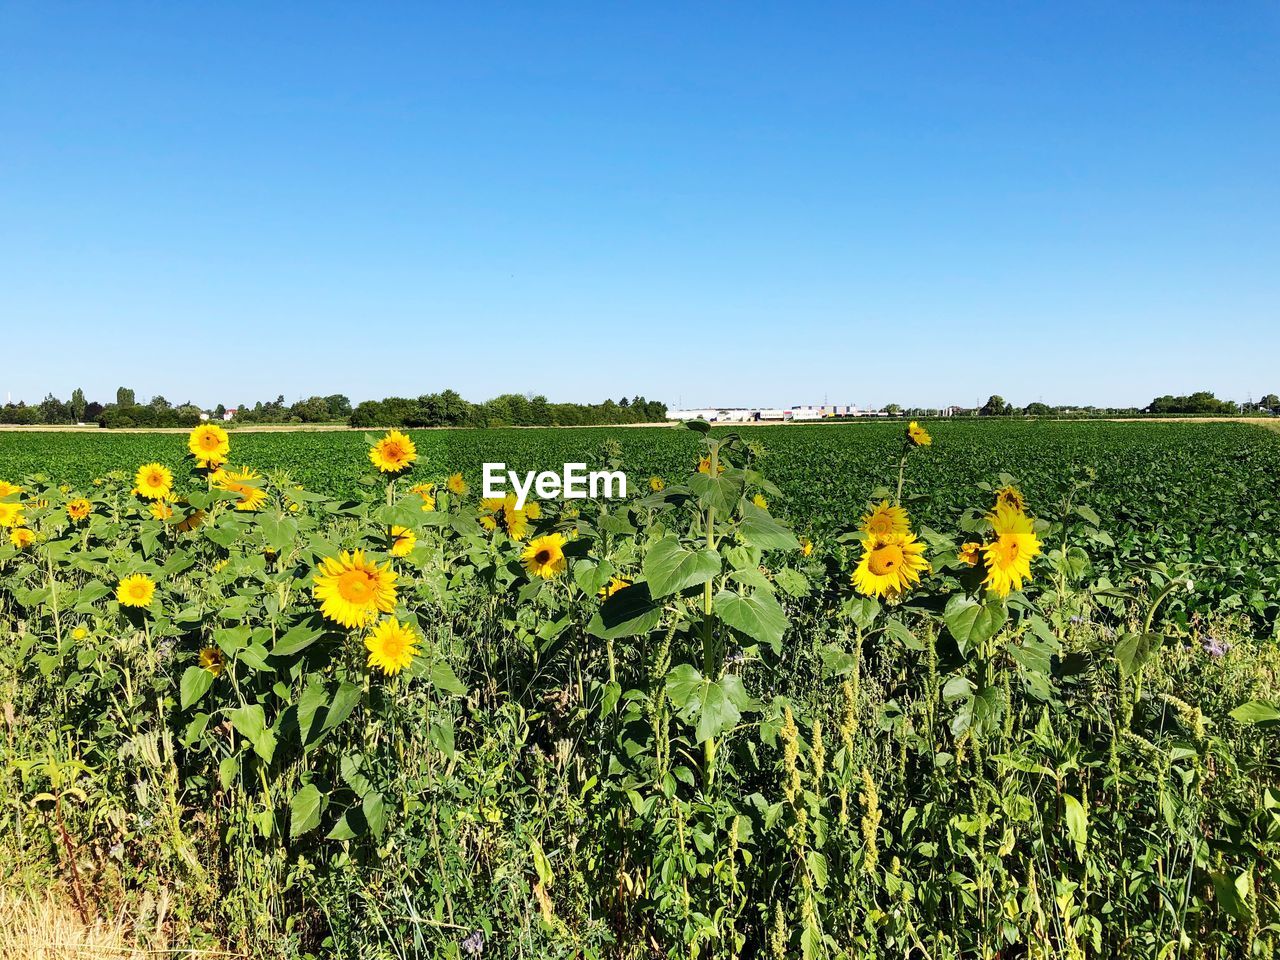 SCENIC VIEW OF SUNFLOWER FIELD AGAINST SKY